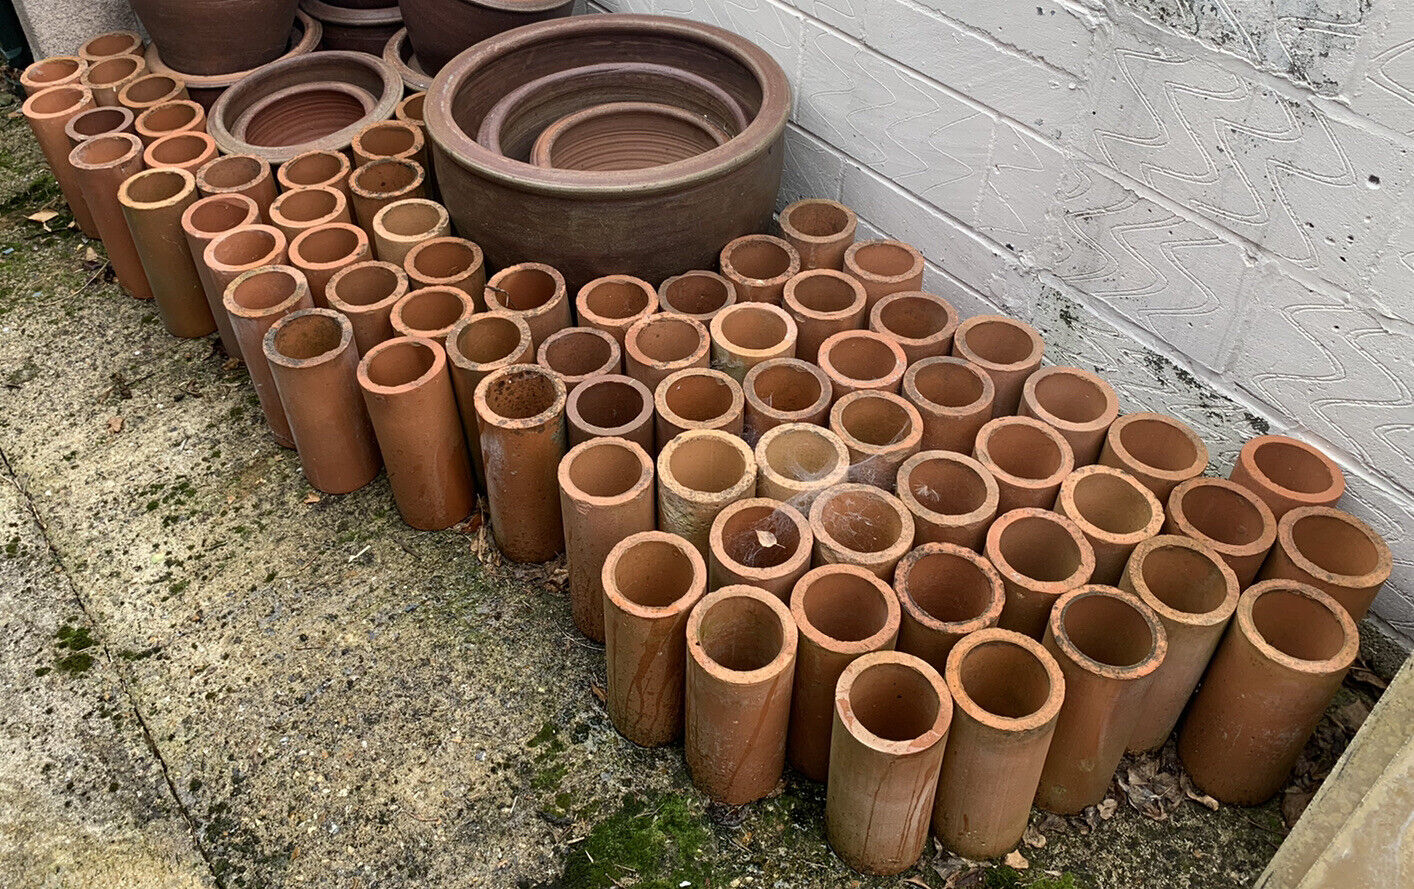 Antique Valuations: Vintage Terracotta Drainage Pipe Clay Pipe Garden Planter Fish Cave Bug Hotel 71